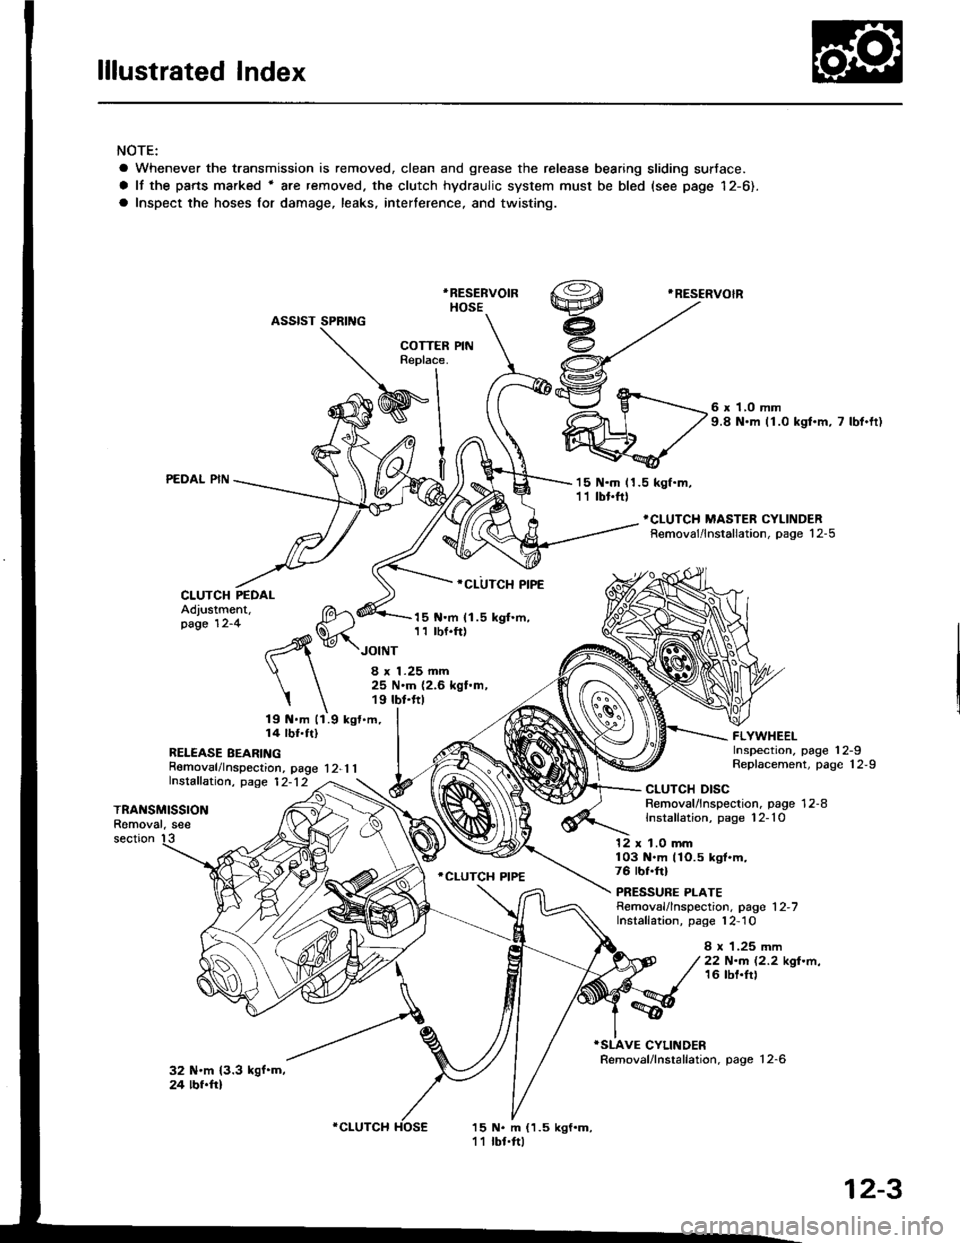 ACURA INTEGRA 1994  Service Repair Manual lllustrated Index
NOTE:
a Whenever the transmission is removed, clean and grease the release bearing sliding sudace.
a It the pans marked r are removed. the clutch hydraulic system must be bled (see p